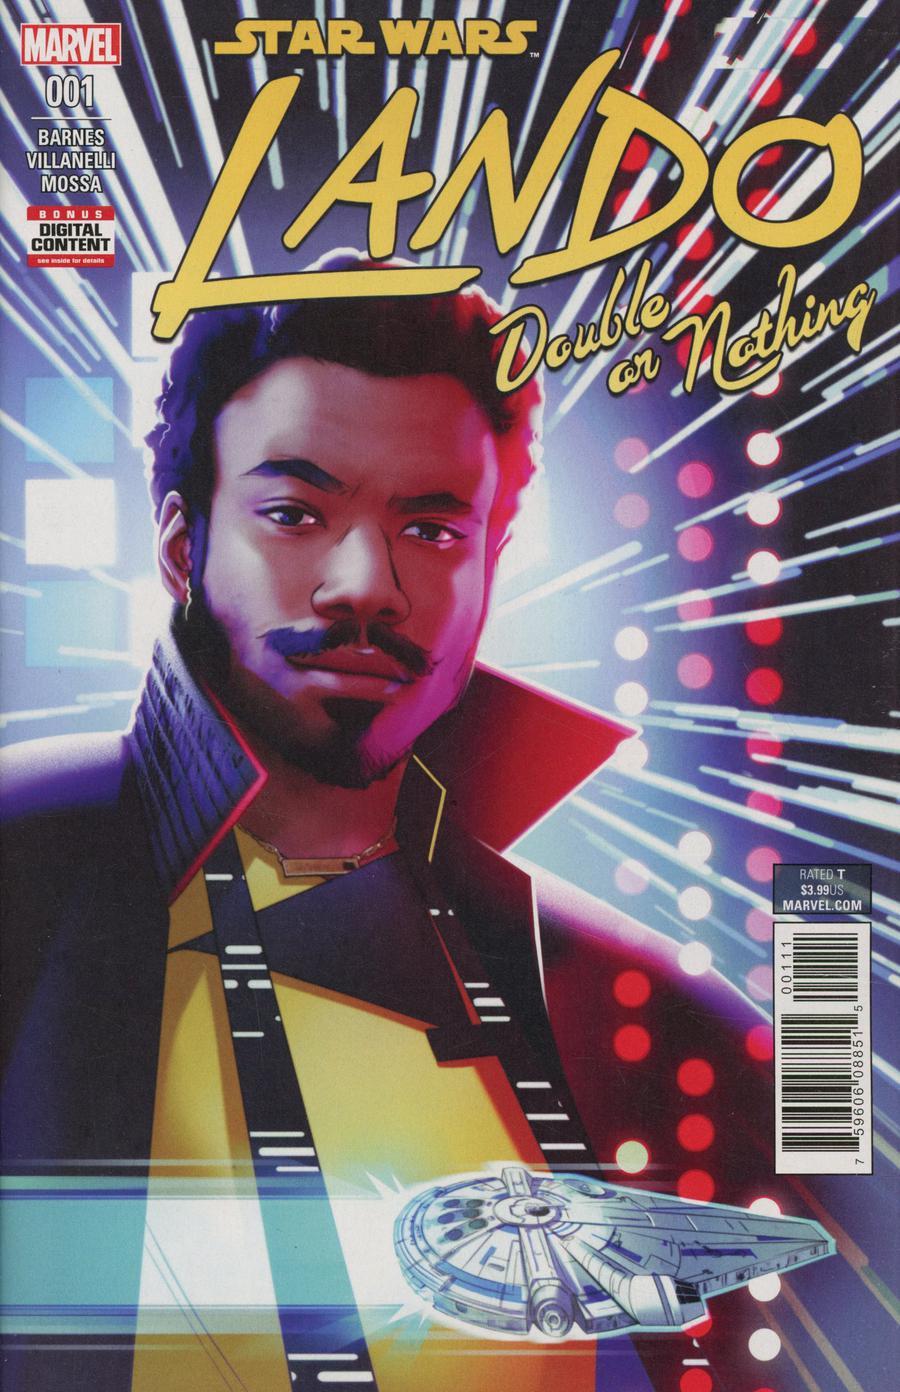 Star Wars Lando Double Or Nothing Vol. 1 #1